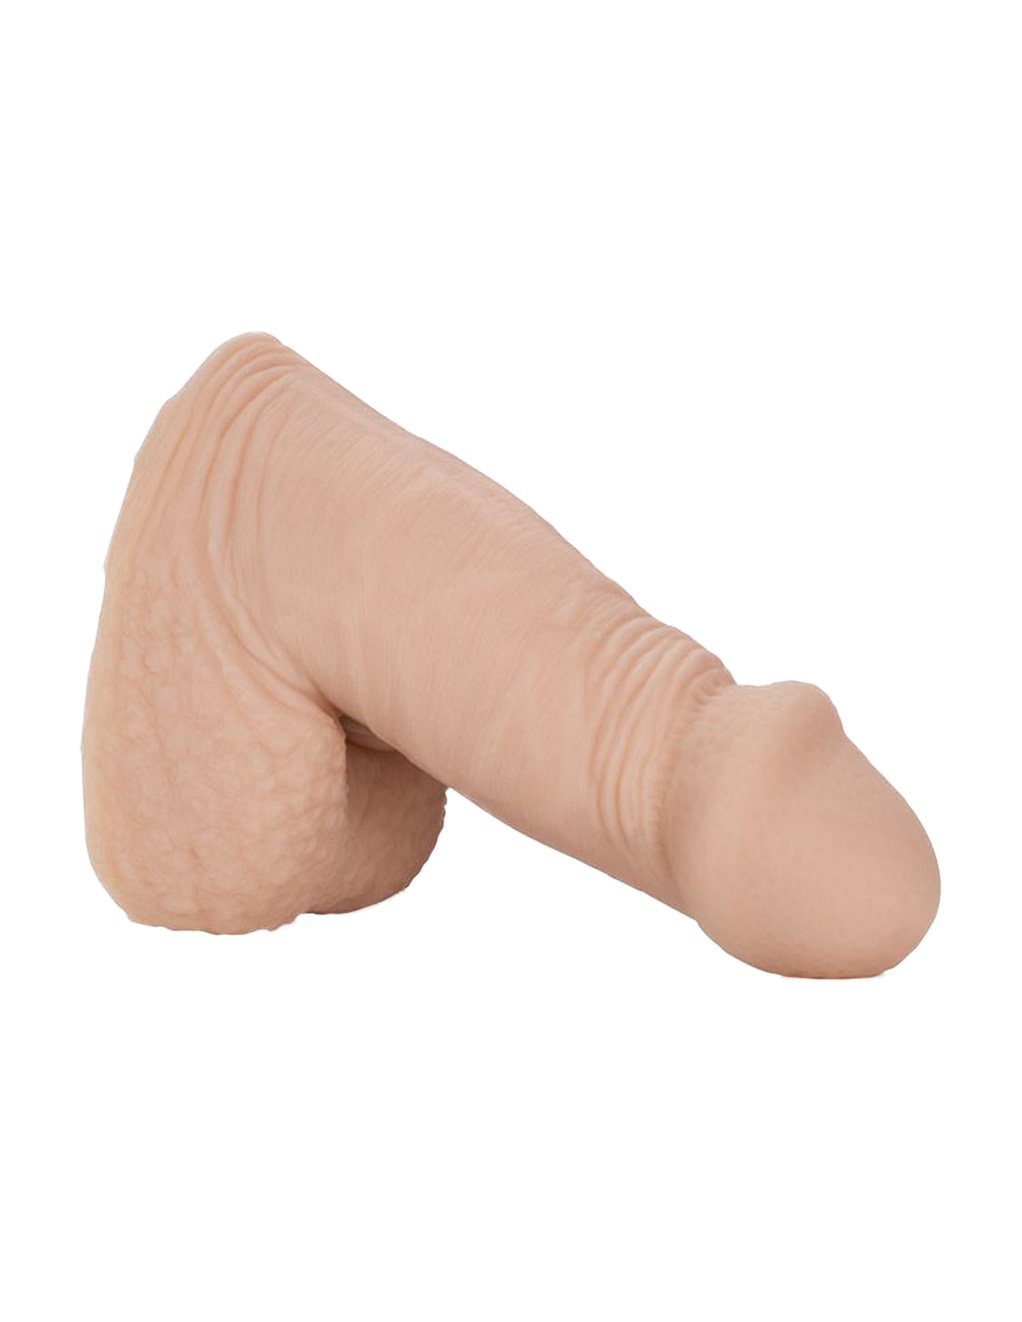 Packer Gear 4 Inch Packing Penis- Ivory- Front